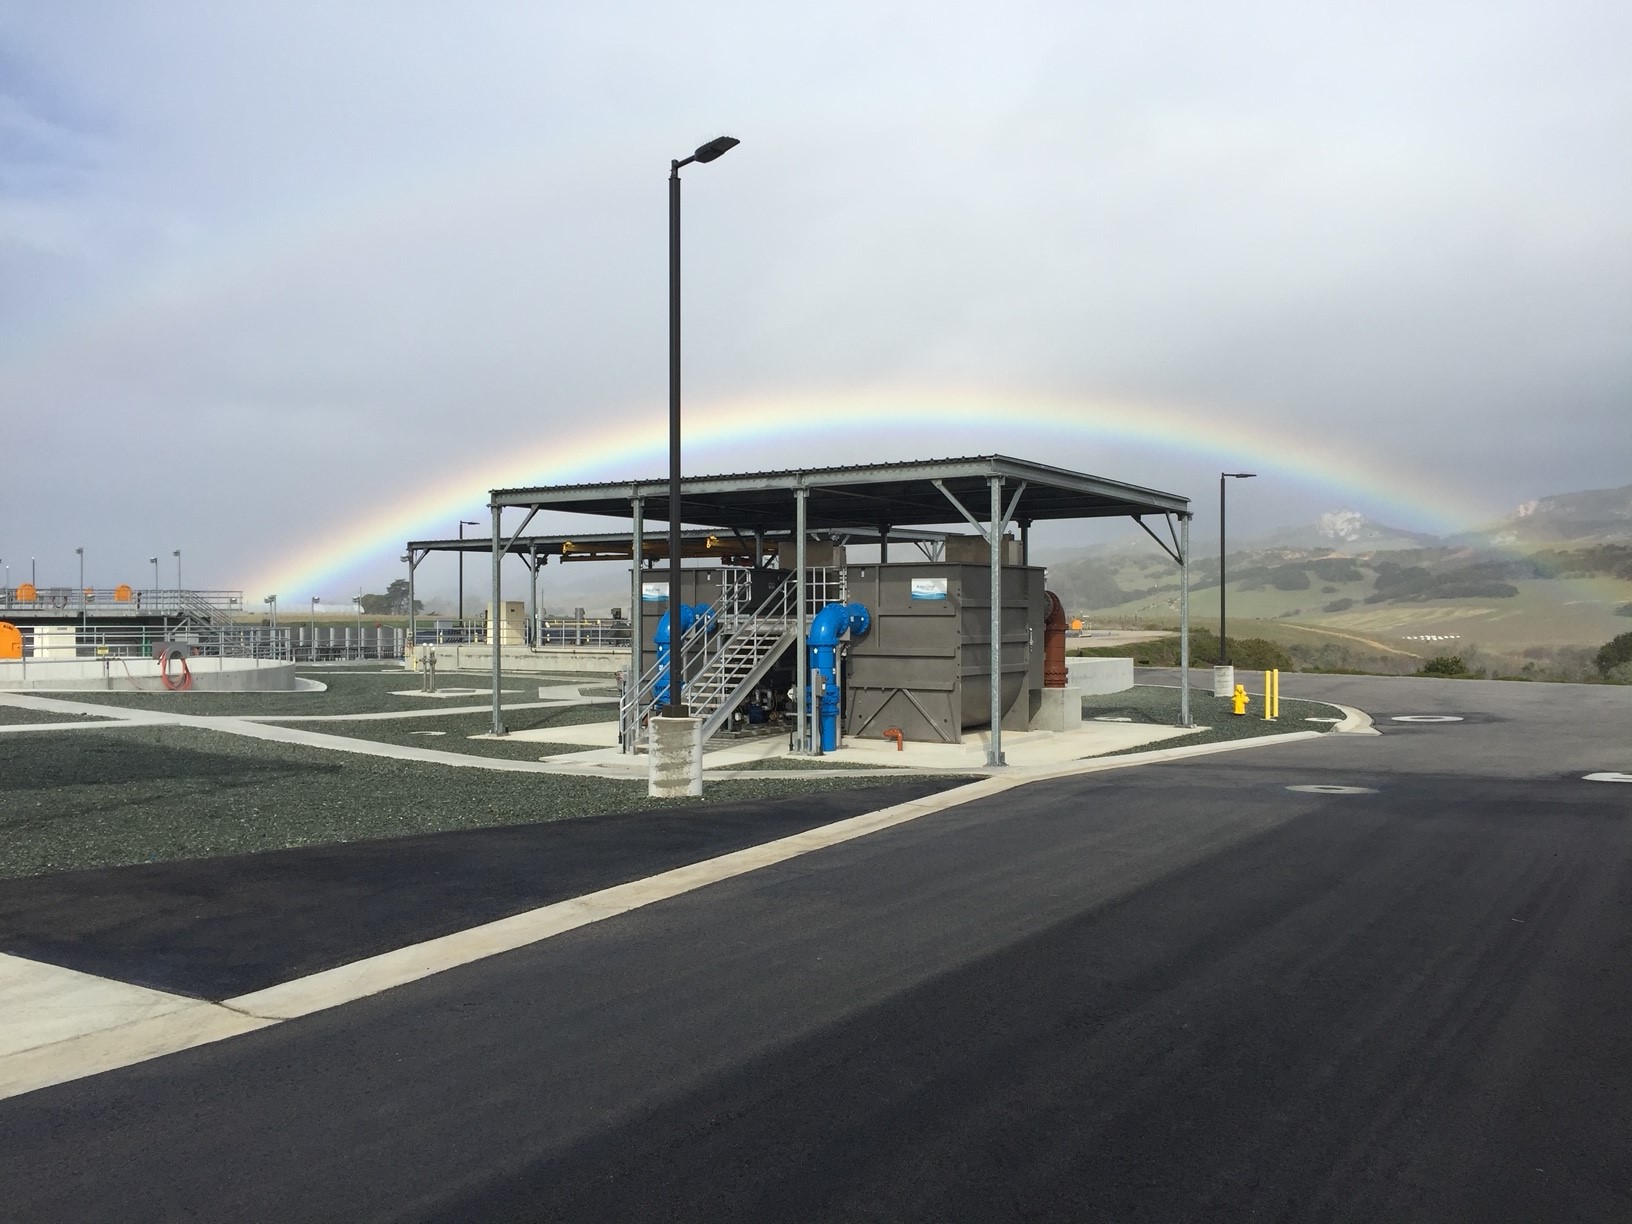 Rainbow over LOWRF facility with mountains in background